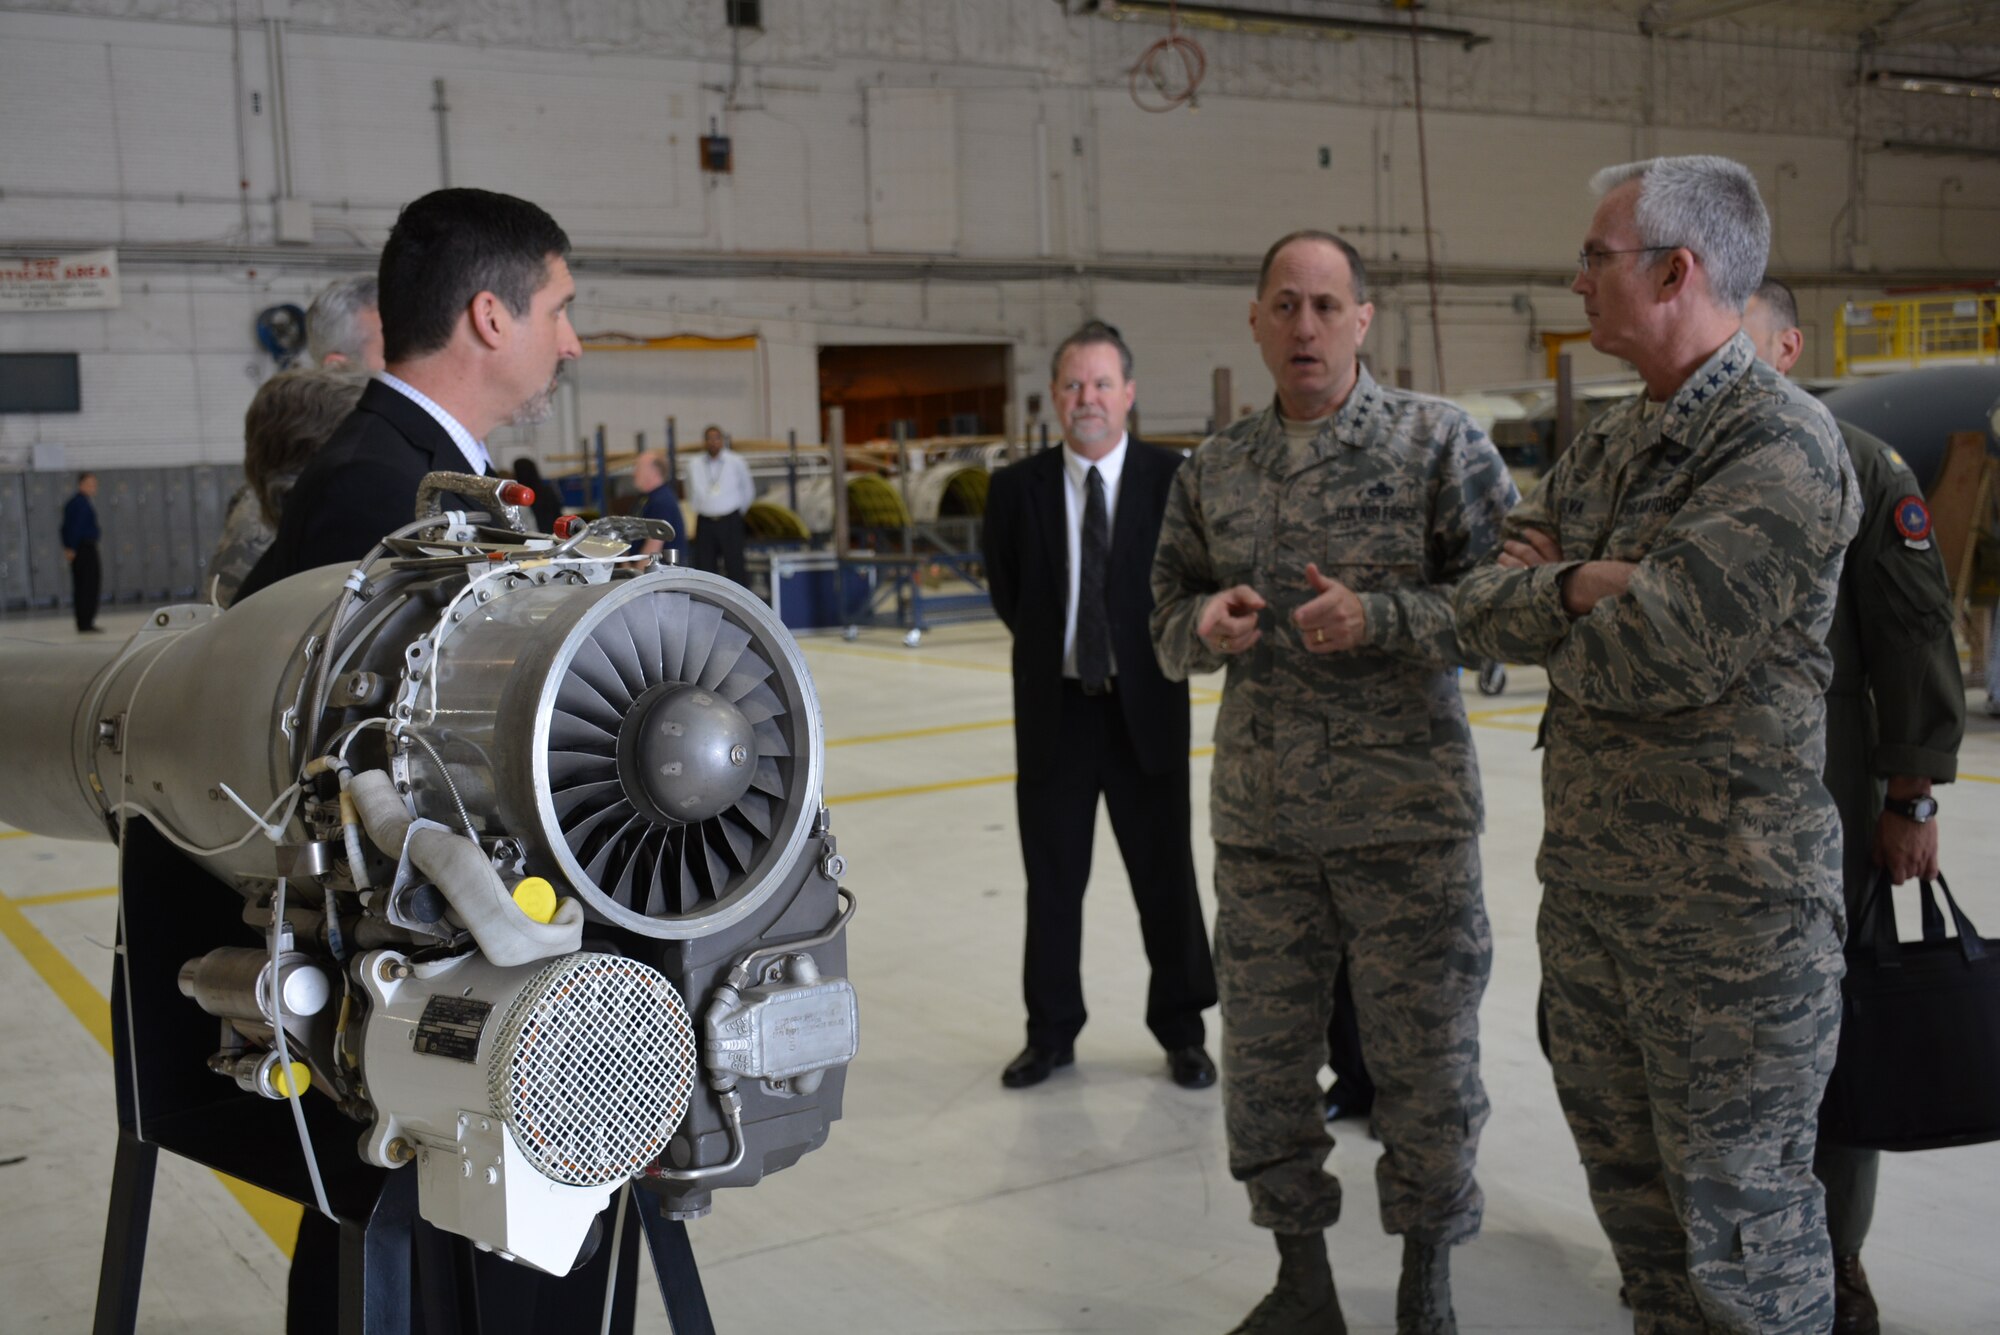 Lt. Gen. Lee K. Levy II, Air Force Sustainment Center Commander, comments during a briefing to Gen. Paul J. Selva, Vice Chairman of the Joint Chiefs of Staff, right, April 1, by Mr. John R. Sneden, Air Force Life Cycle Management Center Propulsion Sustainment Division Chief, left, on F107 engine challenges.  The F107 engine is used to power cruise missiles, the F-22 vapor cycle system and the ethyl glycol and water pumps for the B-2 bomber. Also in the photo is Mr. Charles Alley, 565th Aircraft Maintenance Squadron director.  (U.S. Air Force photo by Darren Heusel)